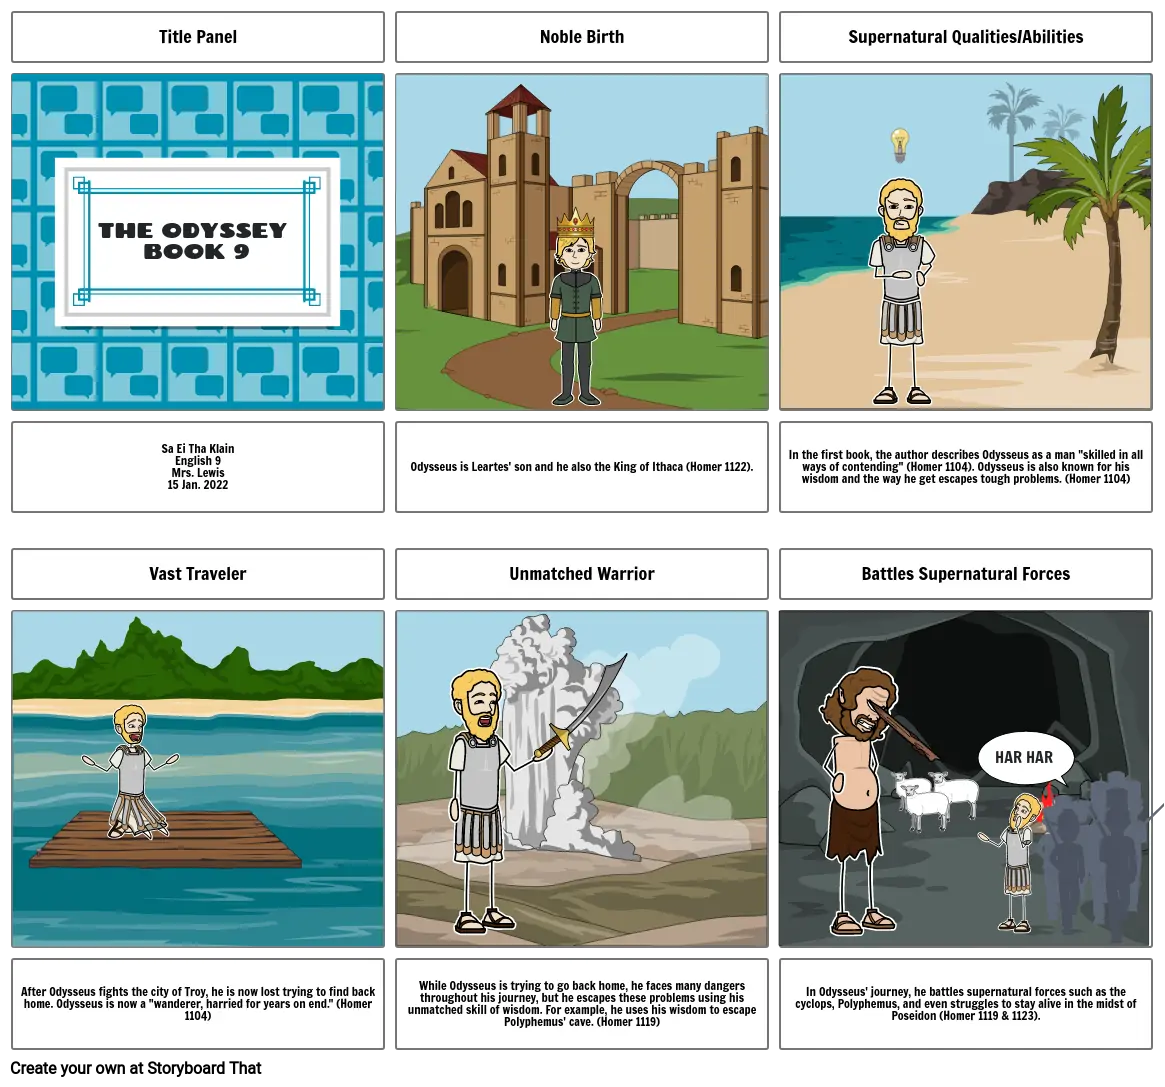 Epic Hero Story boarding Activity - The Odyssey Book 9